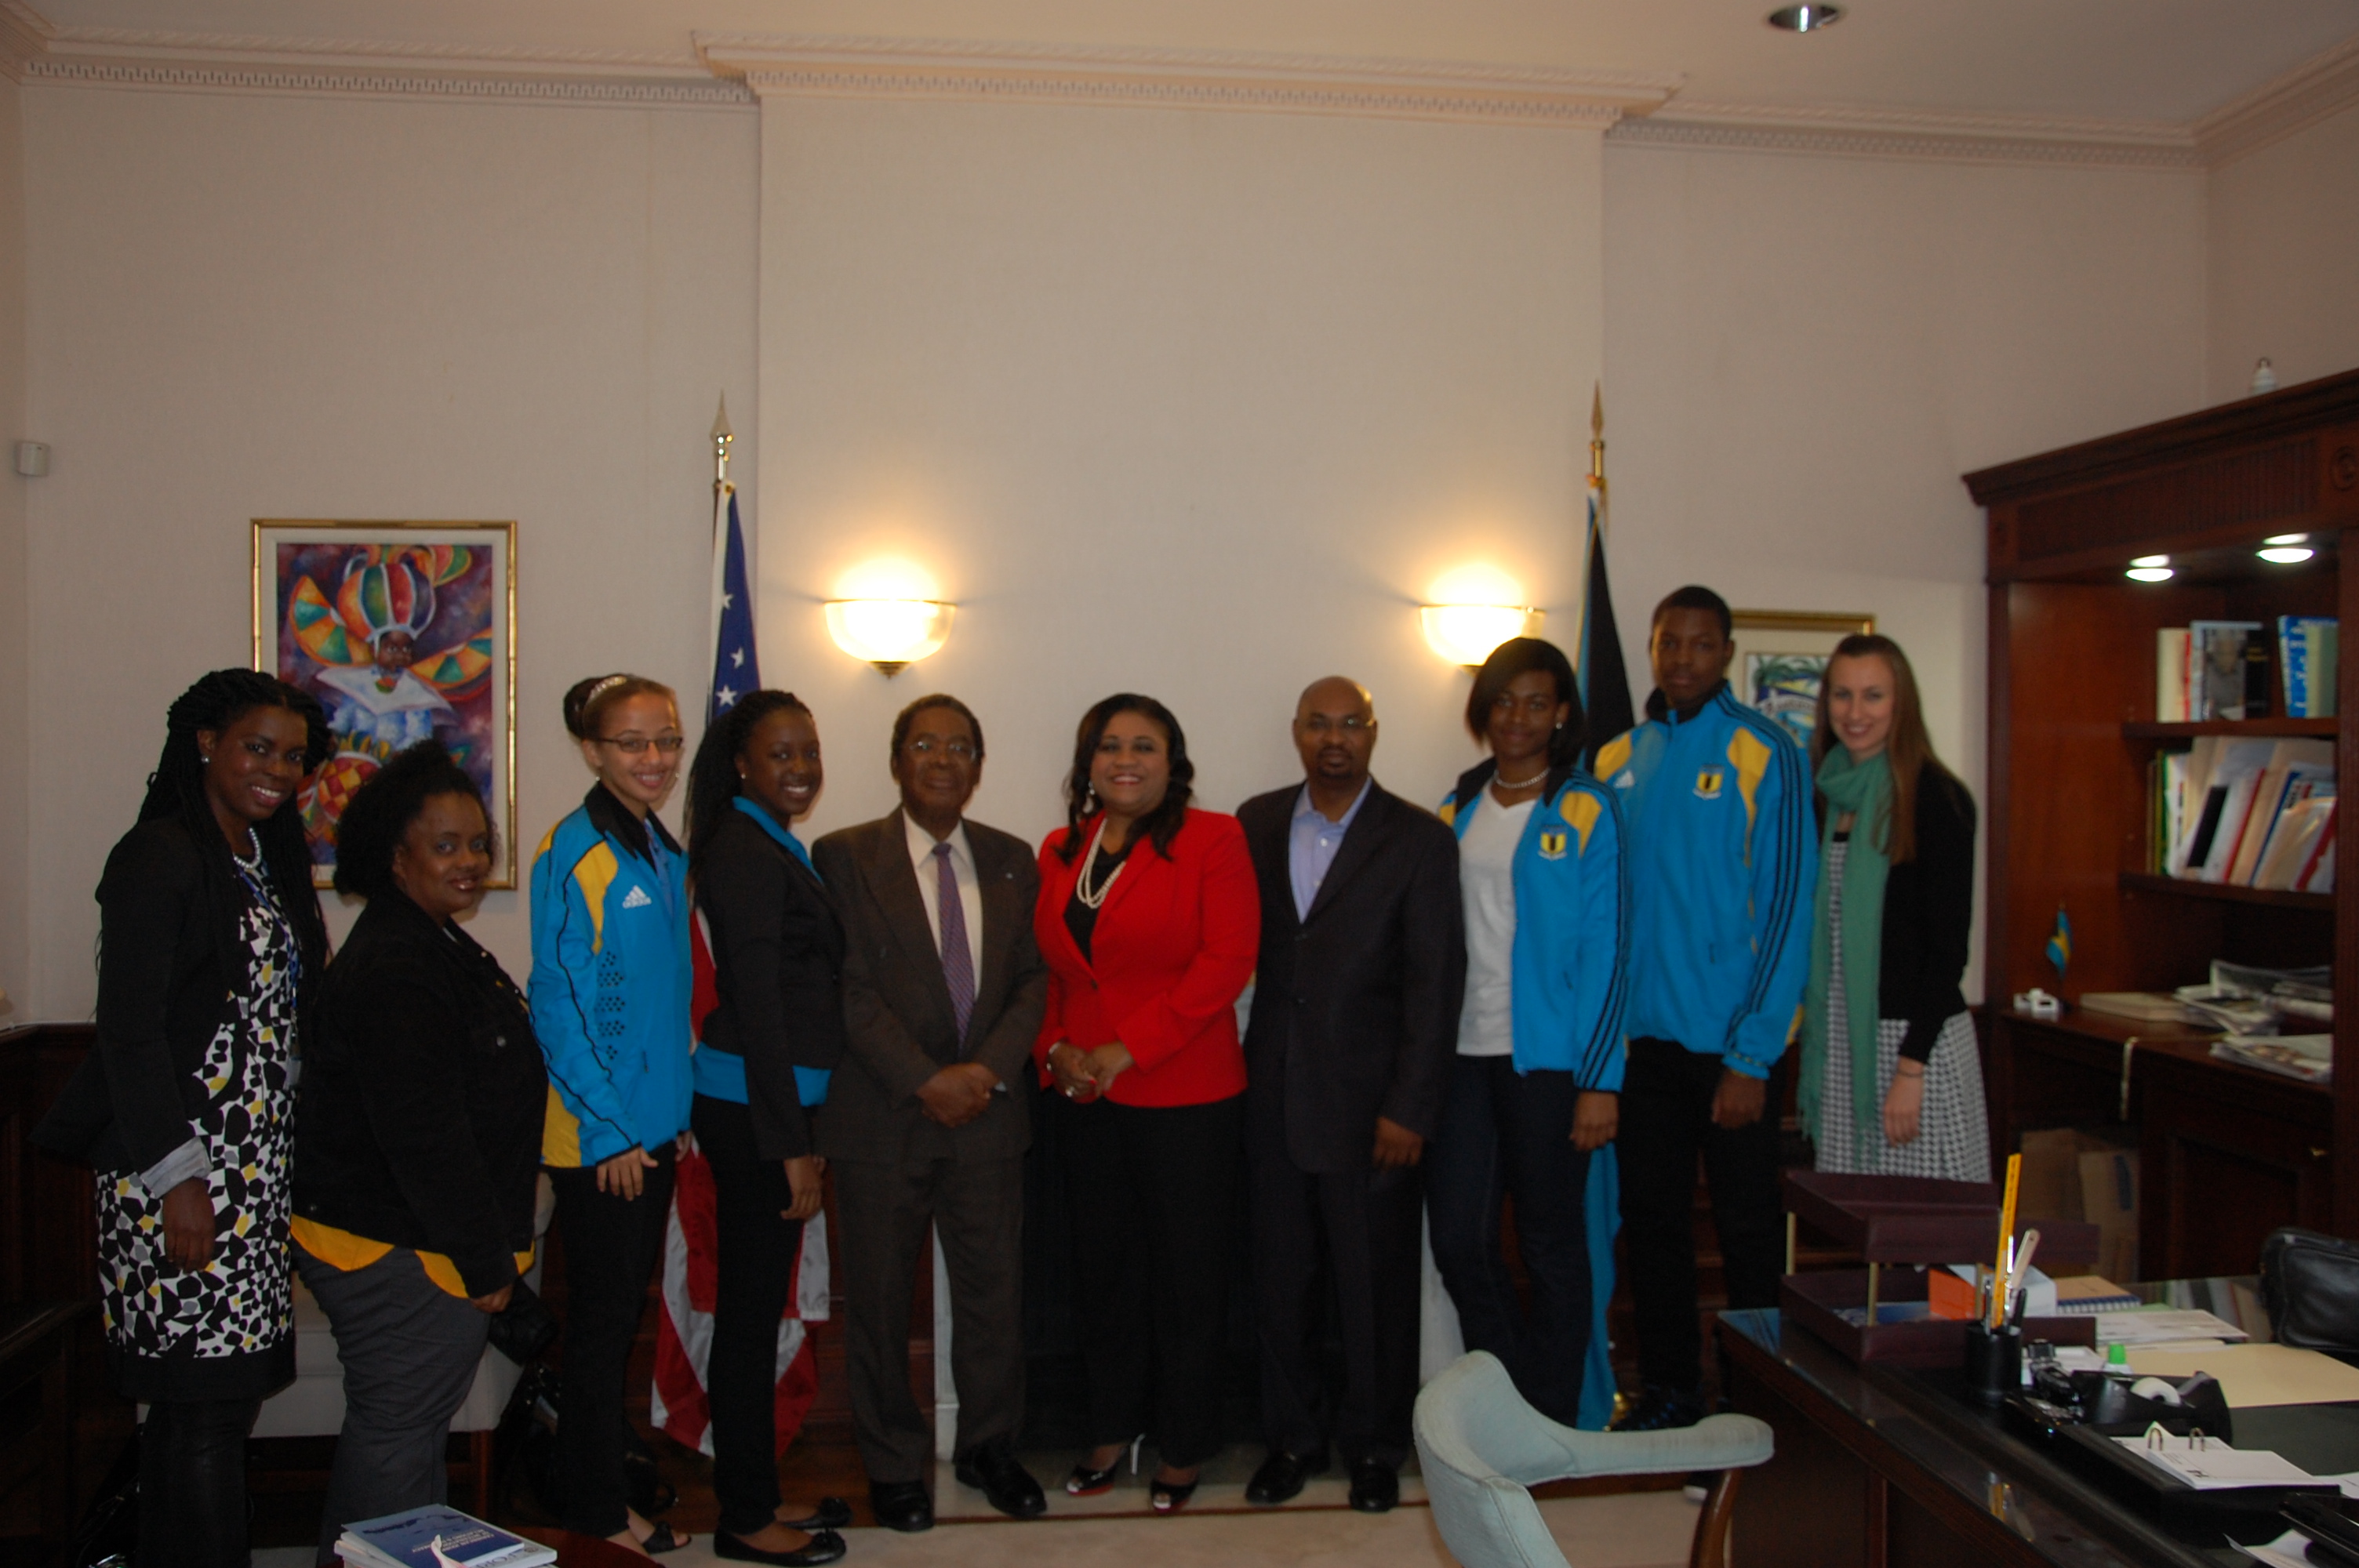 Having recently completed a three-week program sponsored by the BoldLeaders organization, four student Youth Ambassadors from The Bahamas and their guidance counselor visited the Bahamas Embassy in Washington, D.C.